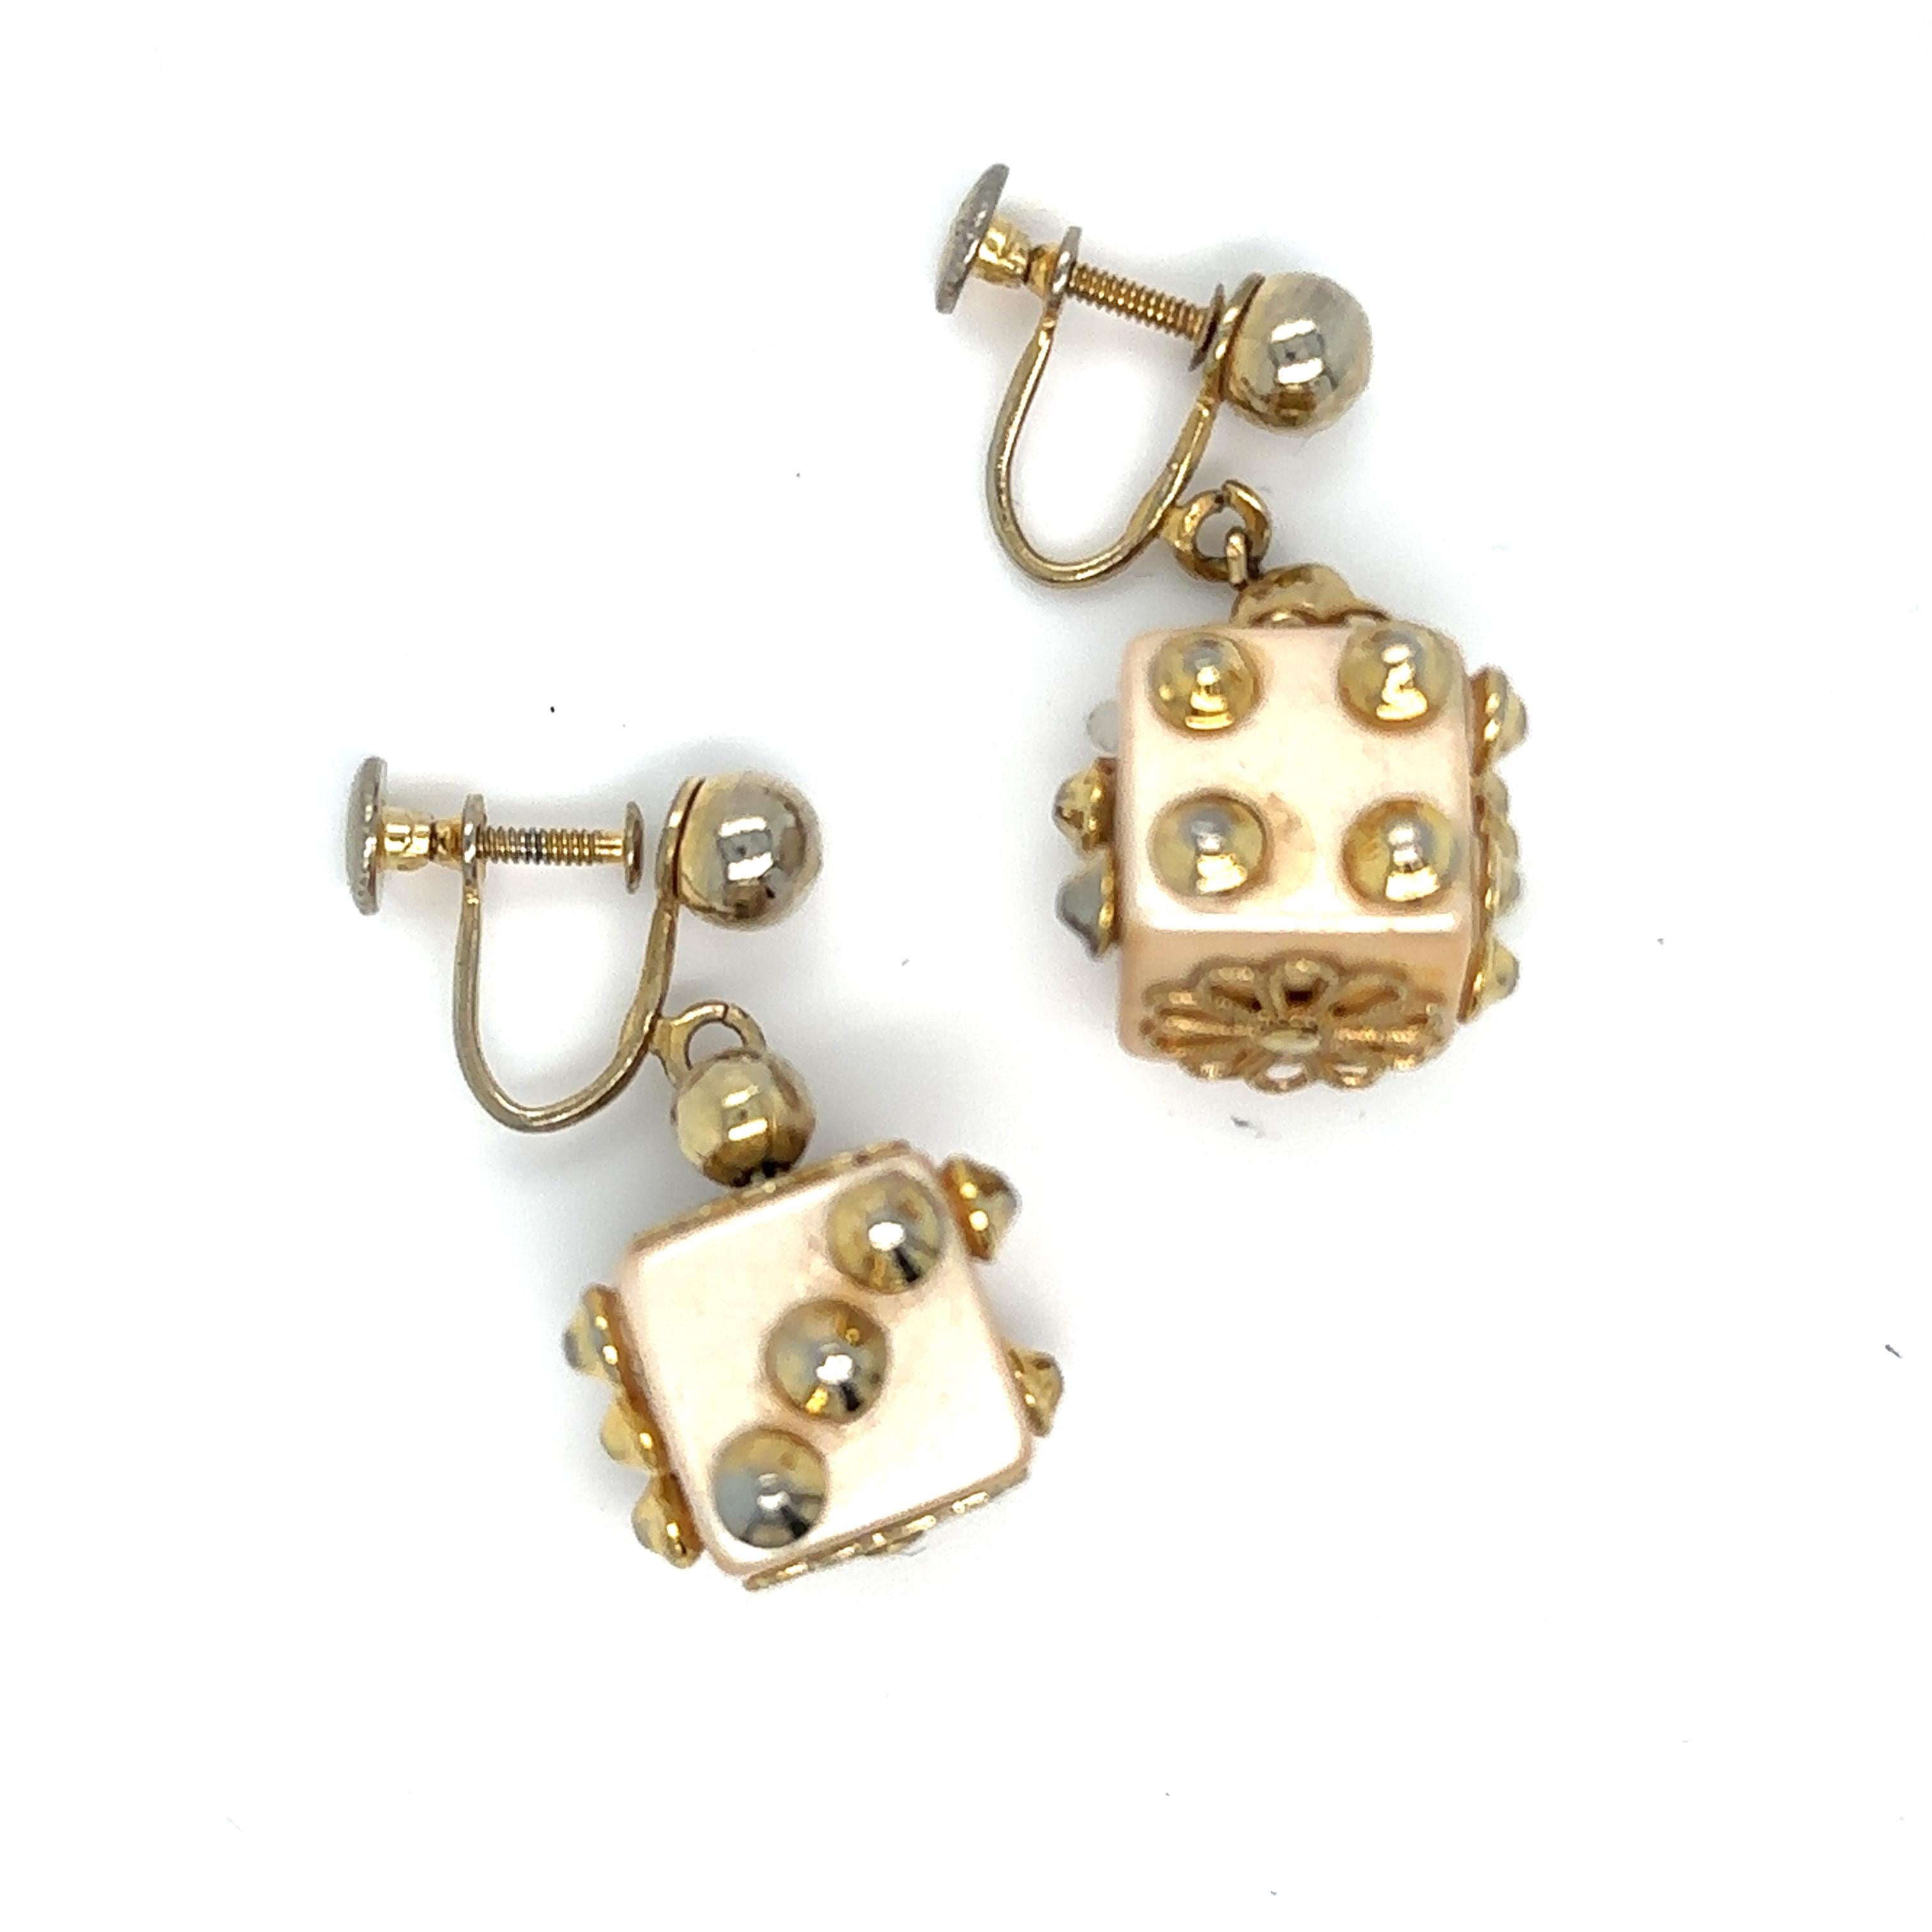 Bracelet and earrings featuring molded resin dice accented with gold metal studs (some missing). 
Bracelet 7 inches
Discover the enchanting story behind these exquisite dice earrings and bracelet, a heartfelt gift from Marilyn Monroe's beloved